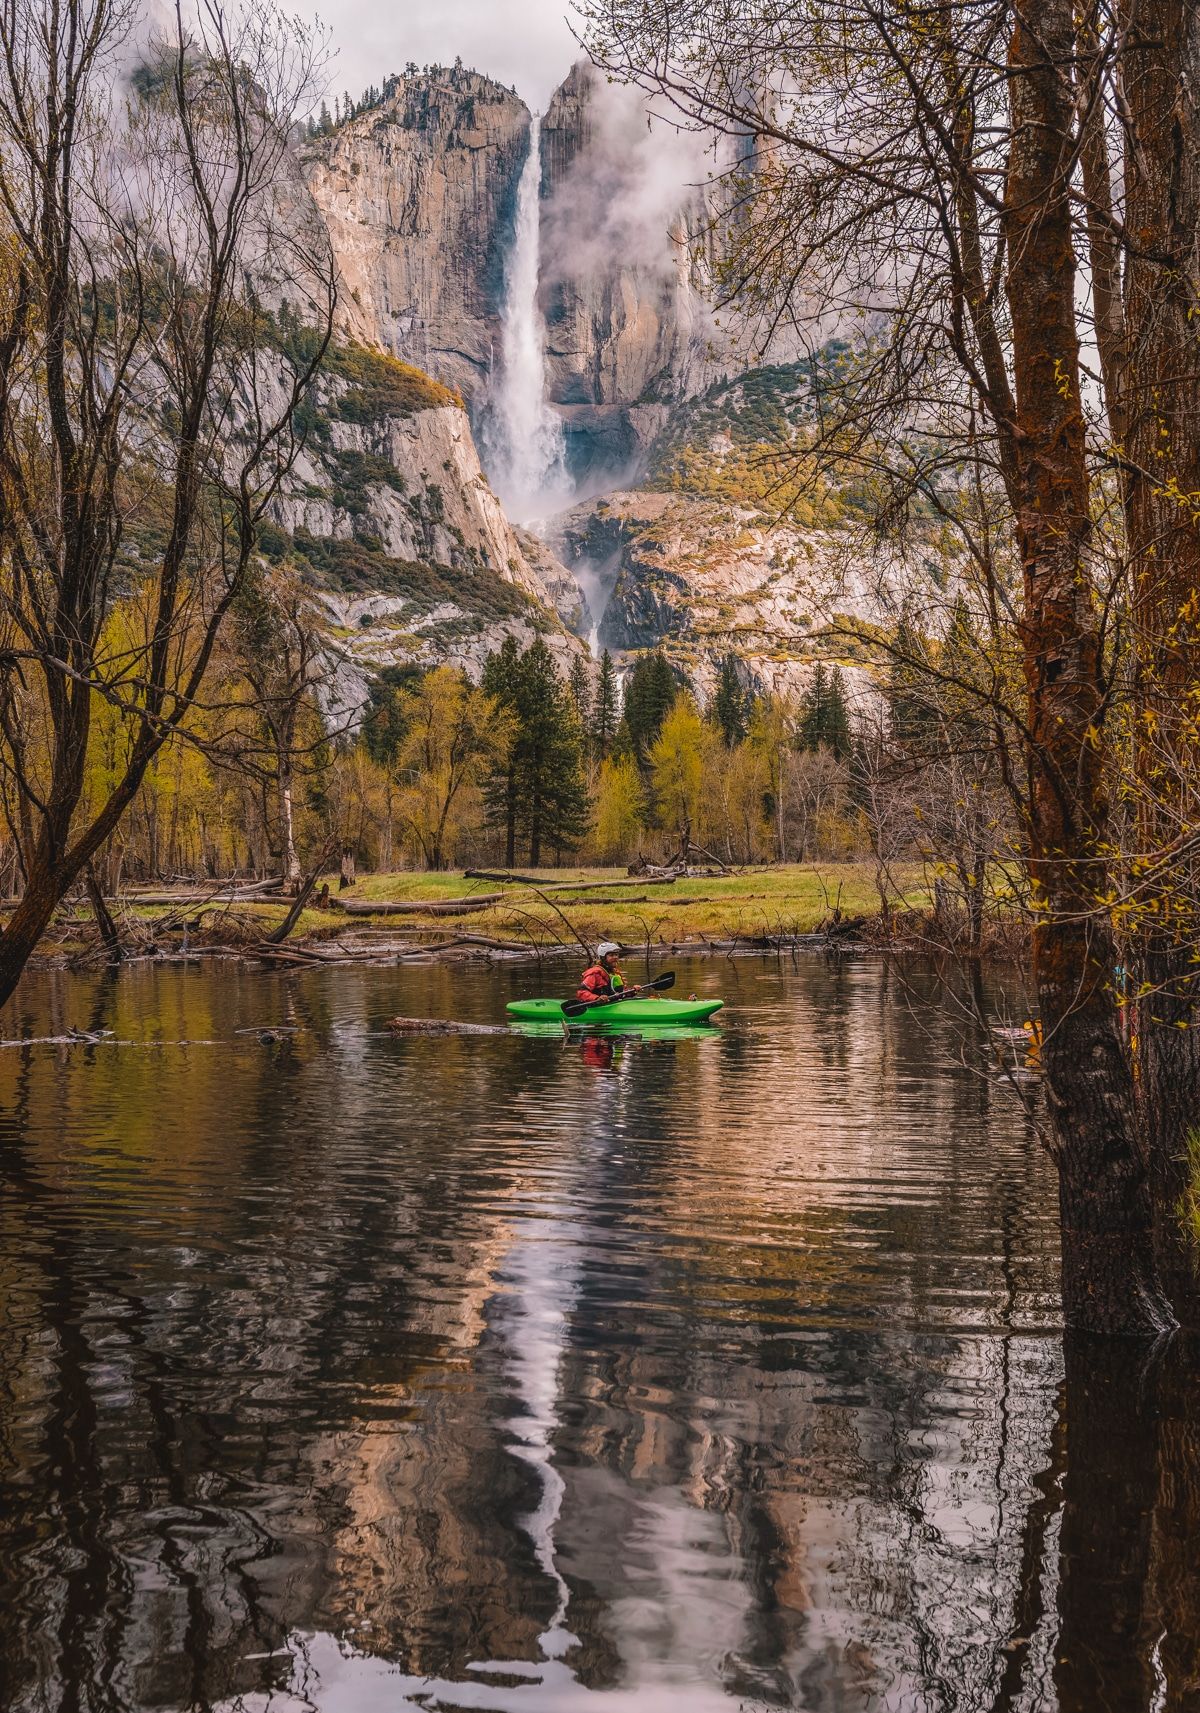 A single kayak floats on a pristine lake in the foreground and a giant waterfall cascades down a cliff-face in the distant background.